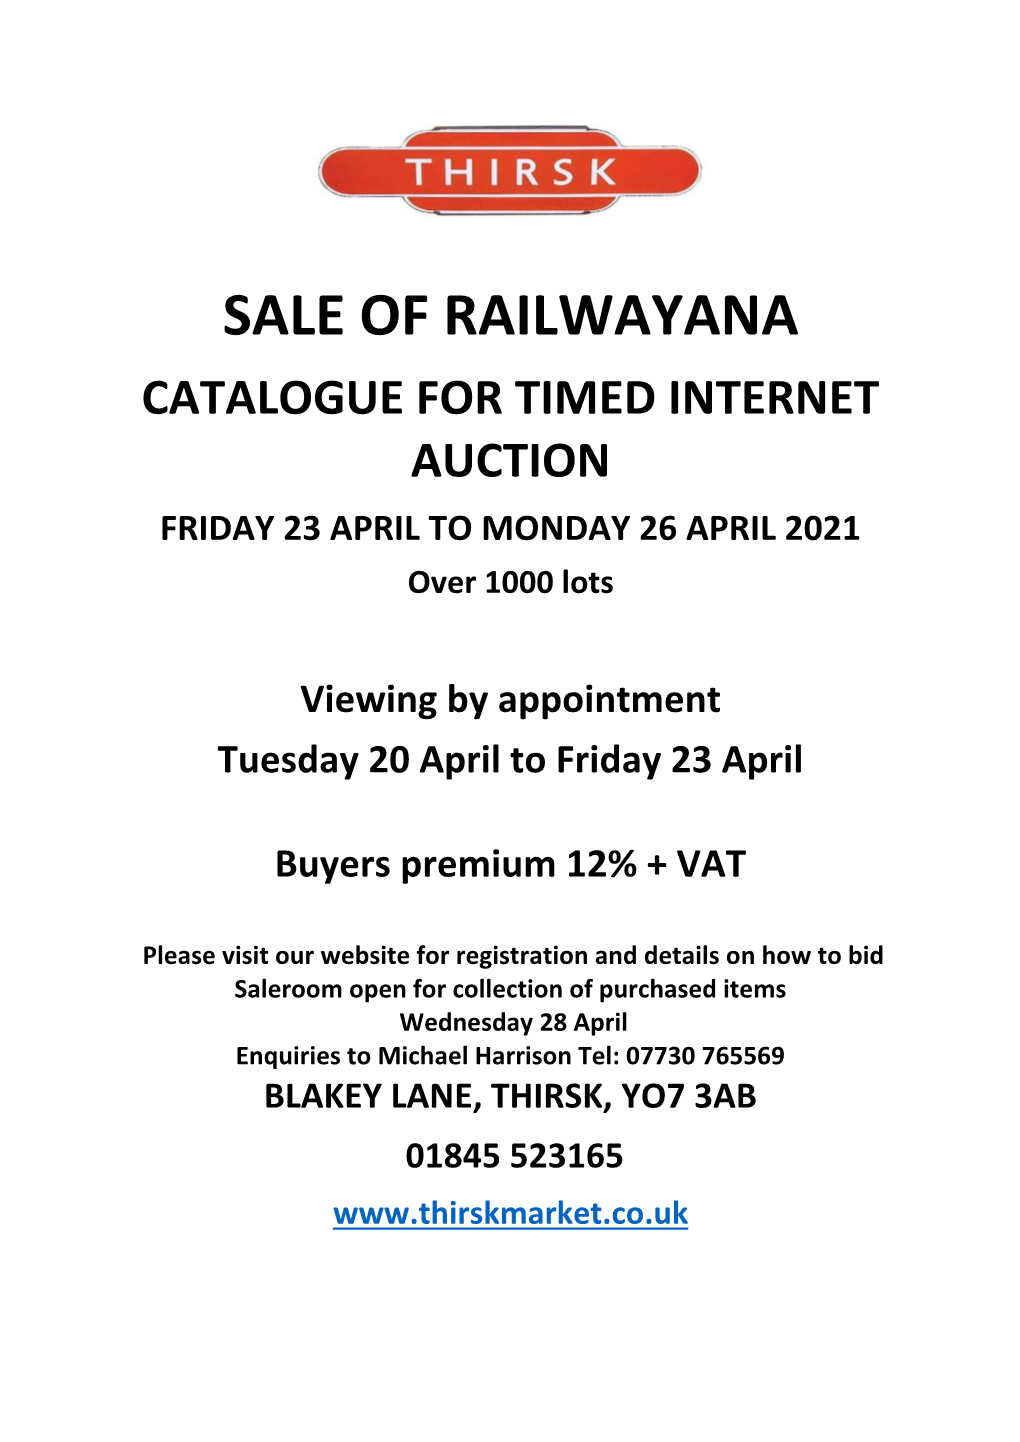 SALE of RAILWAYANA CATALOGUE for TIMED INTERNET AUCTION FRIDAY 23 APRIL to MONDAY 26 APRIL 2021 Over 1000 Lots